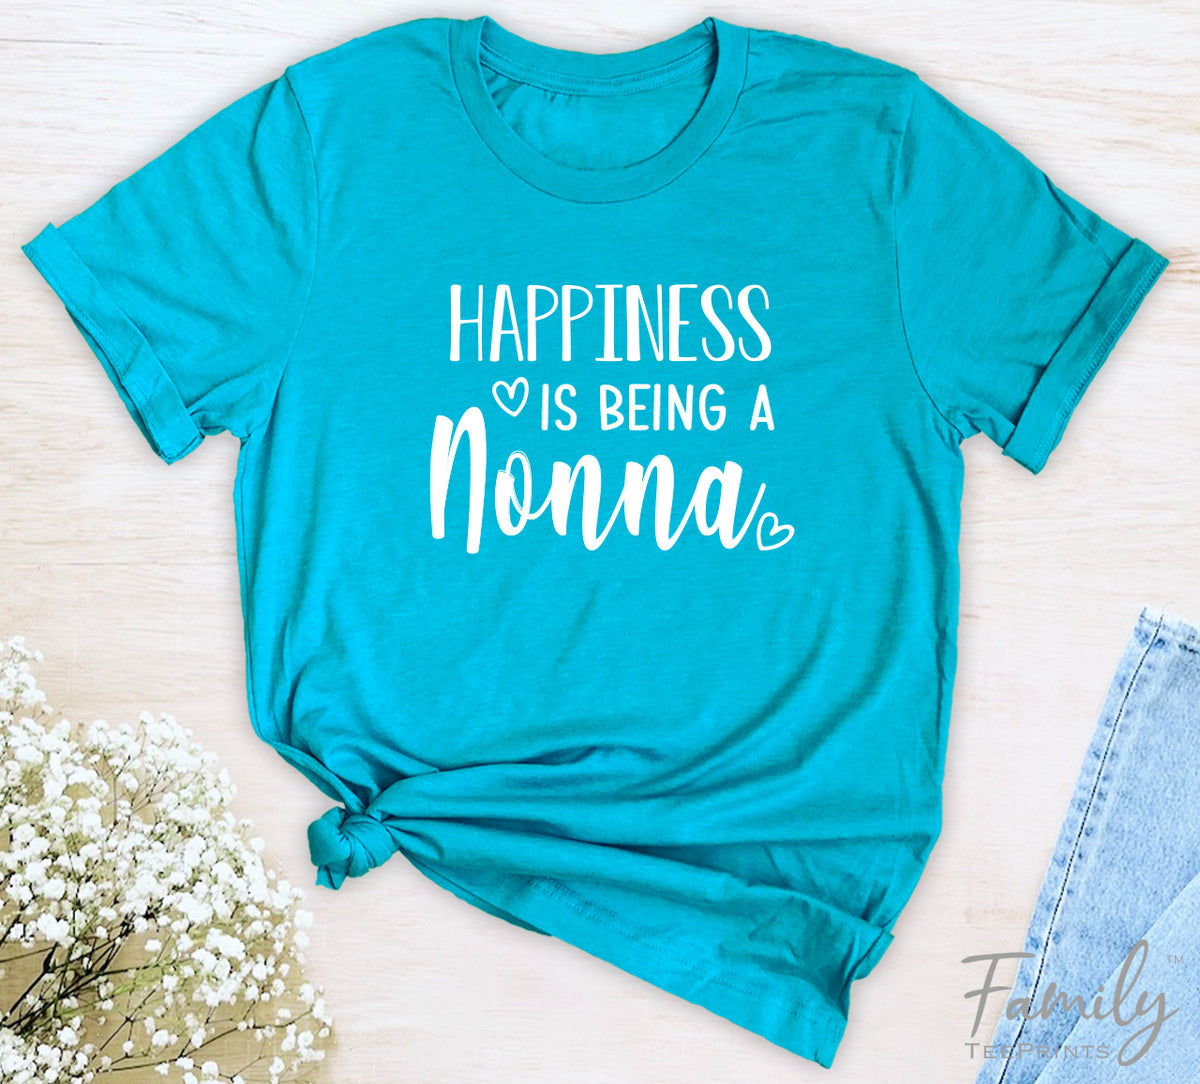 Happiness Is Being A Nonna - Unisex T-shirt - Nonna Shirt - Gift For Nonna - familyteeprints